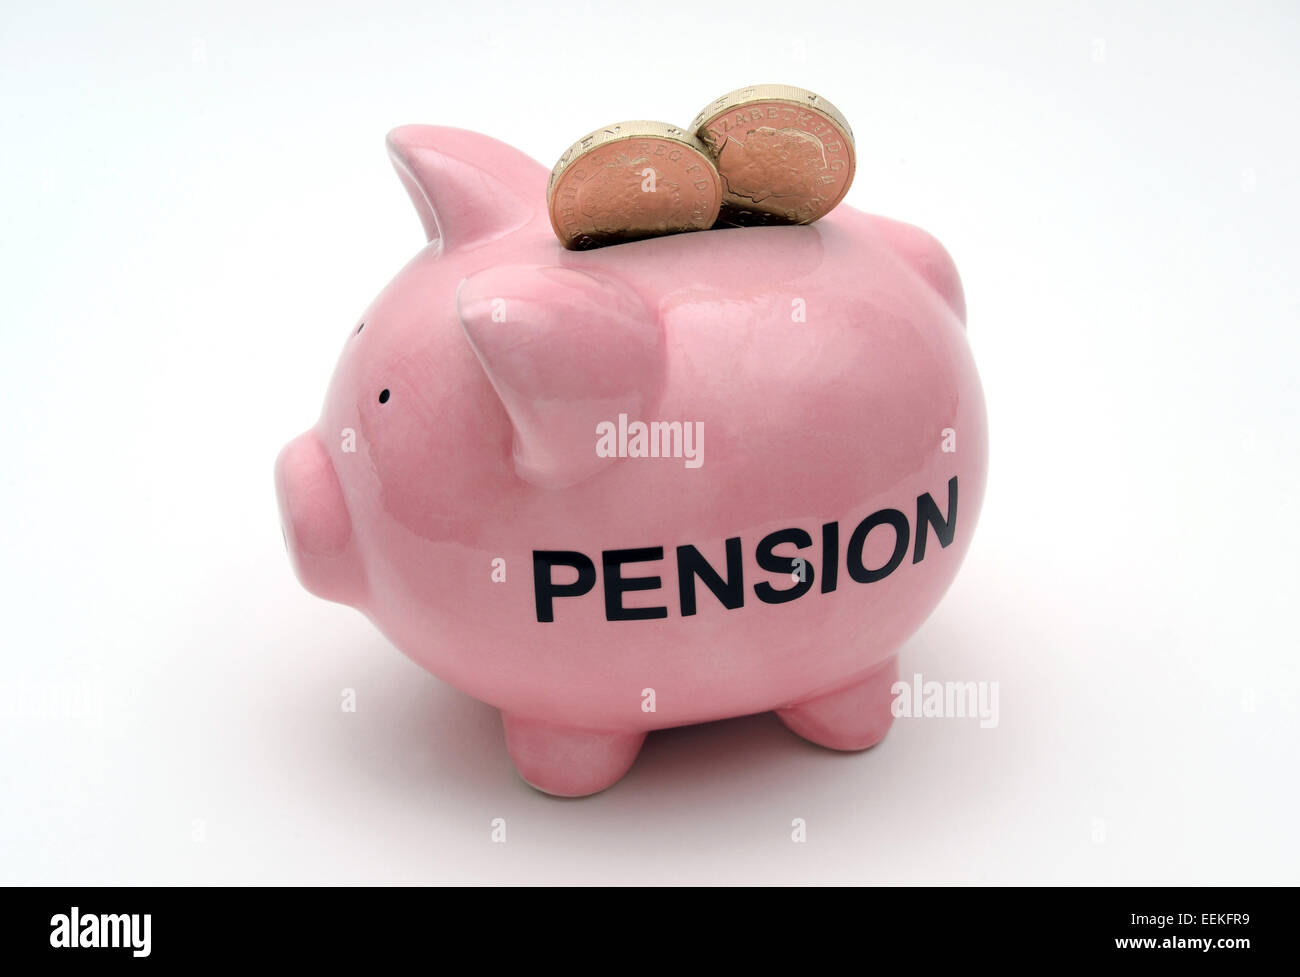 PIGGYBANK WITH POUND COINS AND PENSION WORD RE PRICES COSTS HOUSEHOLD BUDGETS PENSION ANNUITY COMPANY SAVINGS RETIREMENT UK Stock Photo